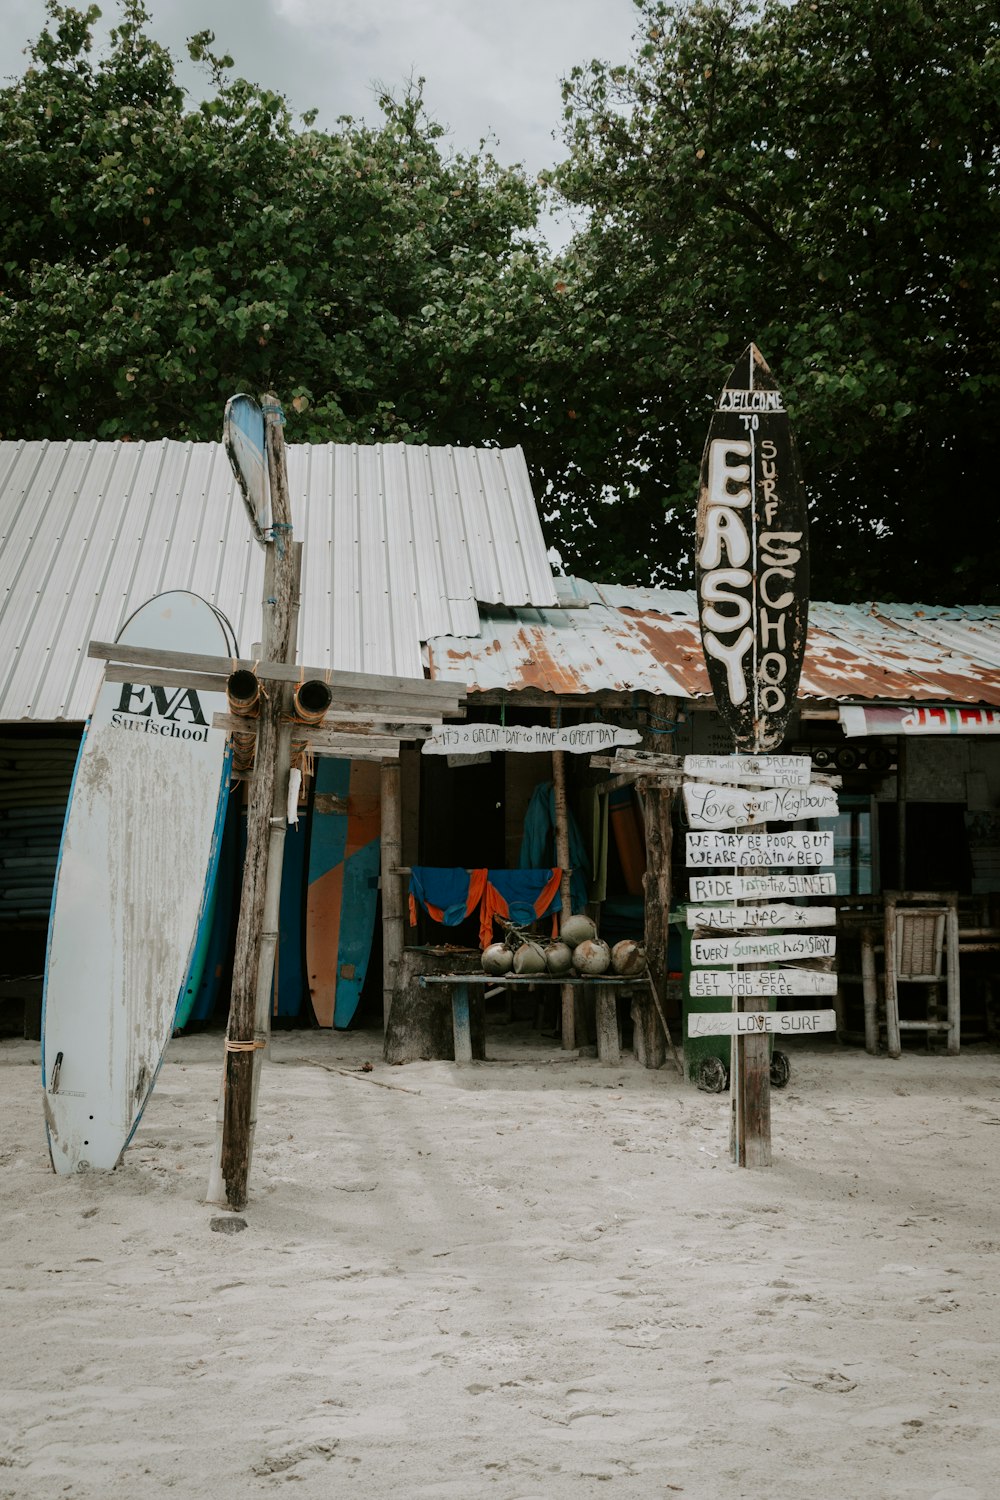 a surfboard leaning up against a pole in front of a building